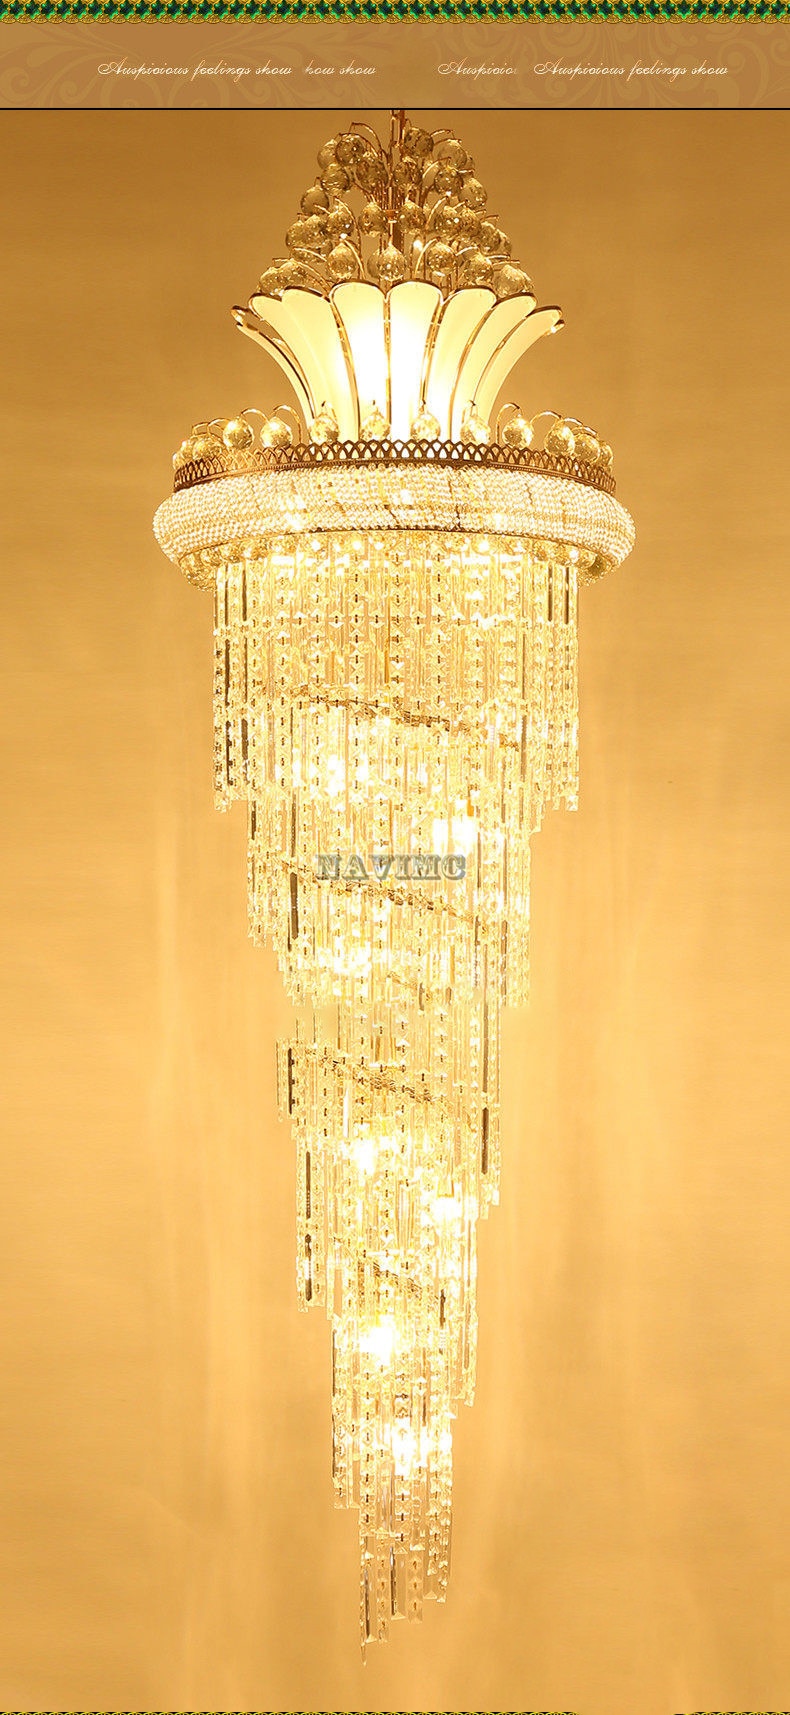 Large Gold Imperial Crystal Chandelier For Hotel Hall Living Room Staircase Hanging Pendant Lamp European Big Lighting